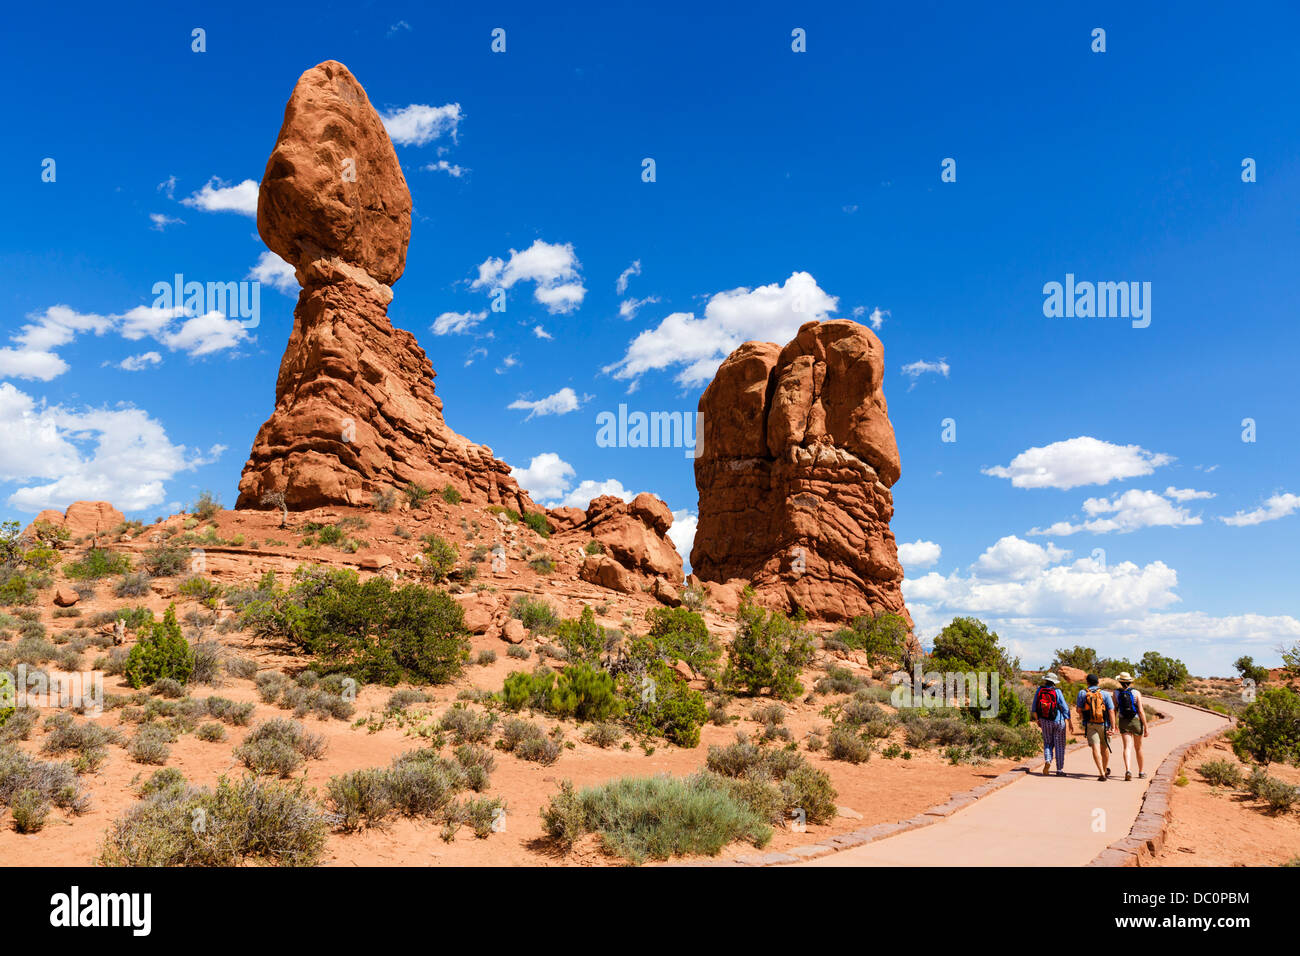 Walkers on the Balanced Rock Trail, Arches National Park, Utah, USA Stock Photo